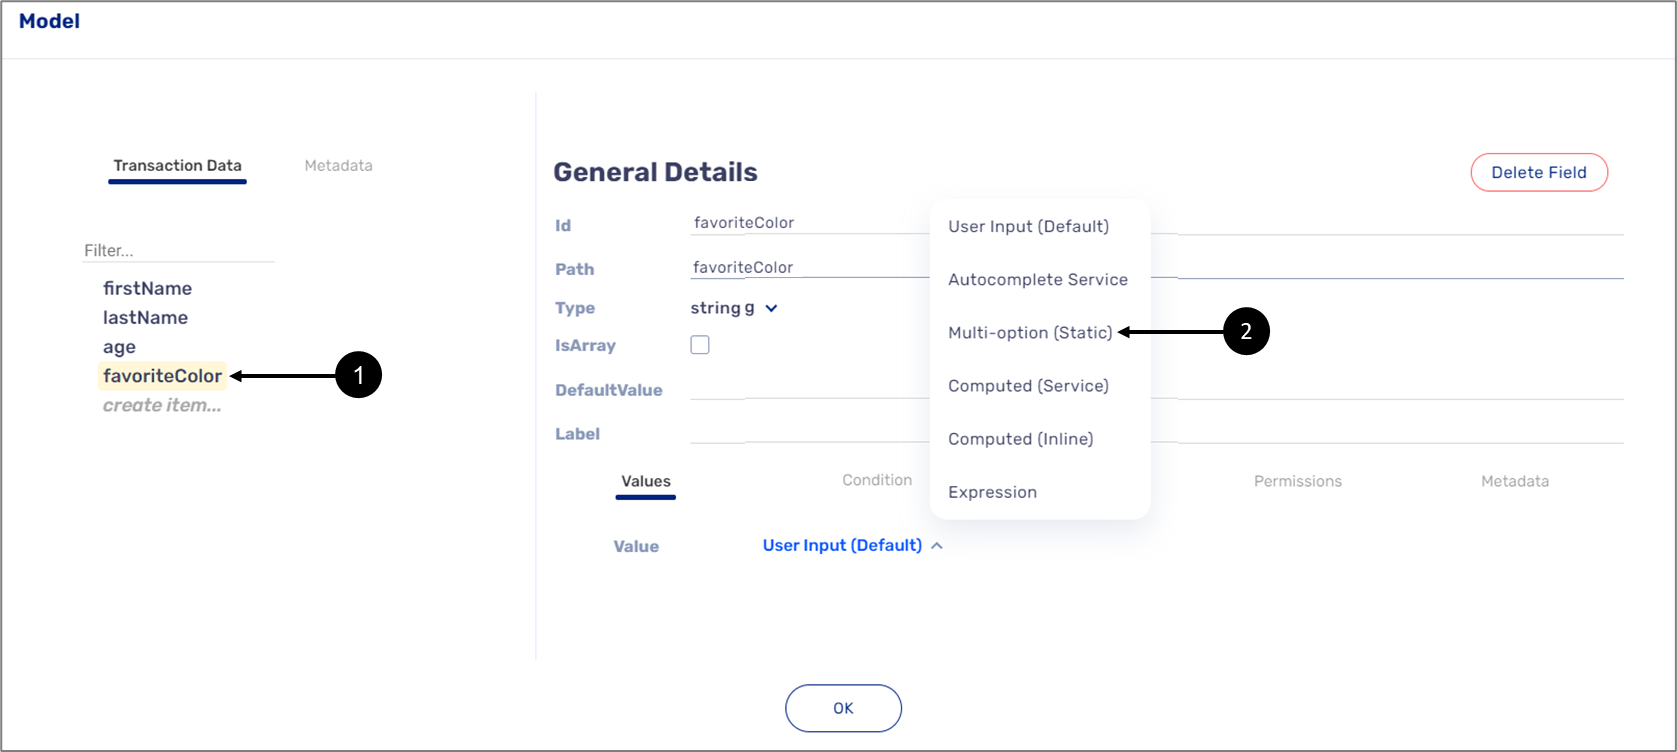 Click the desired transaction data item that is connected to the component you want to implement with the Multi-option (Static) value. Select the Multi-option (Static) value.